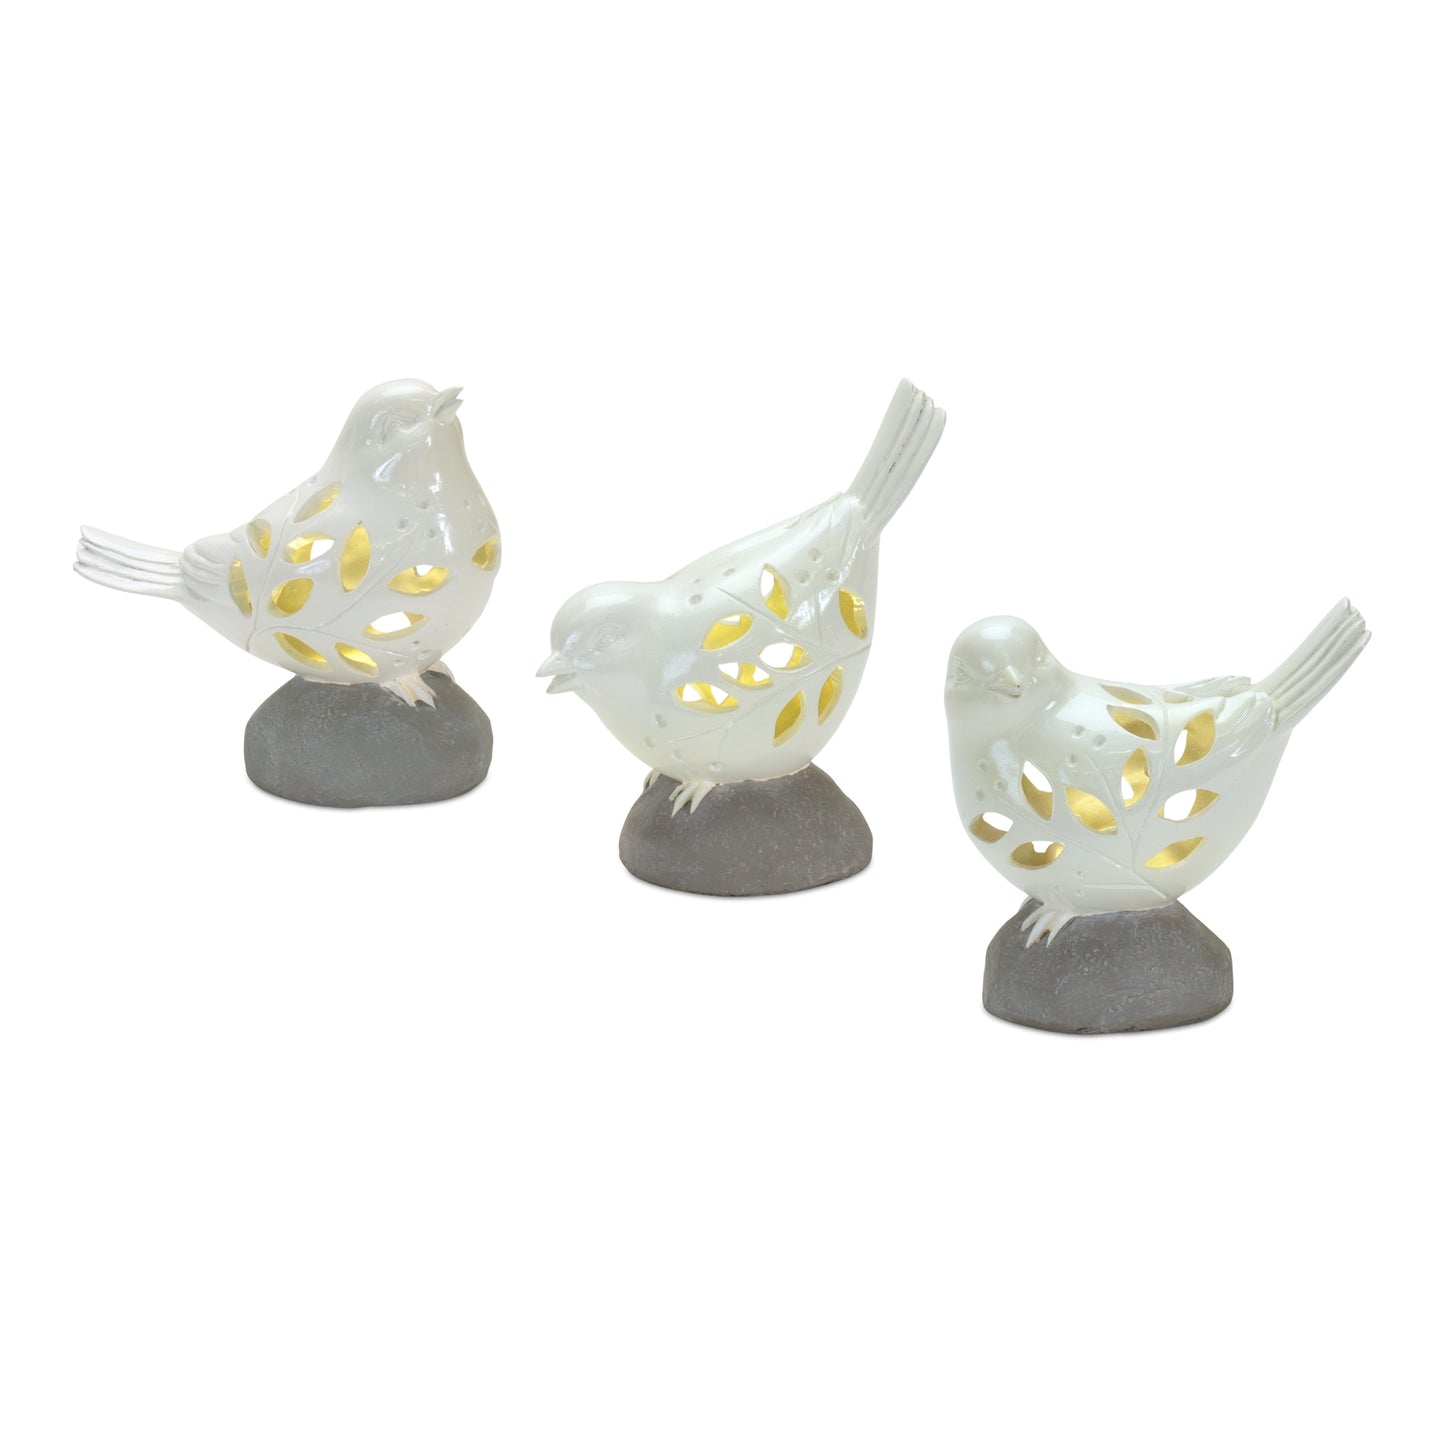 Bird w/Led (Set of 3) 6"H, 6.25"H, 7.25"H Resin 2 AA Battery, Not Included